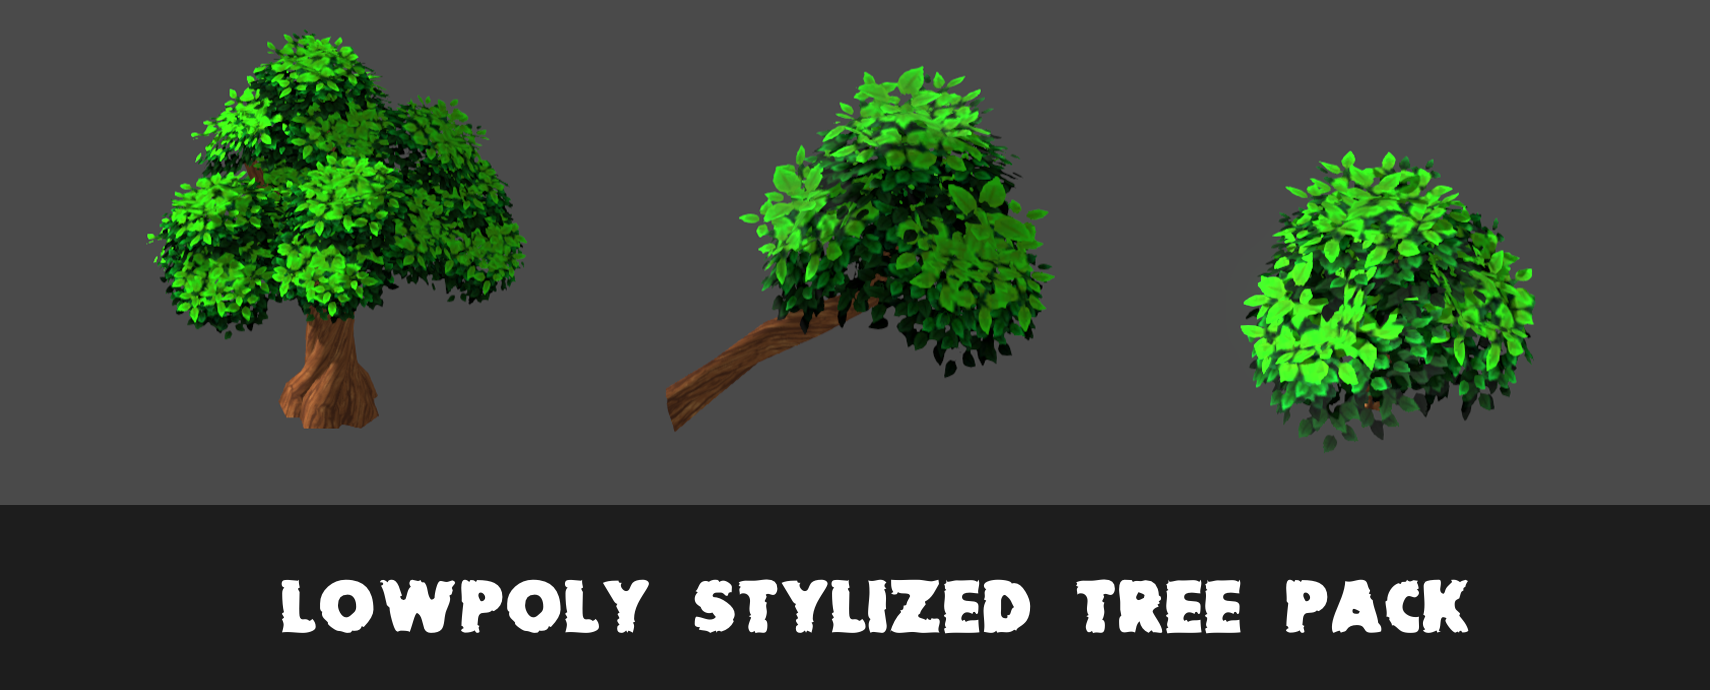 3D lowpoly stylized tree pack